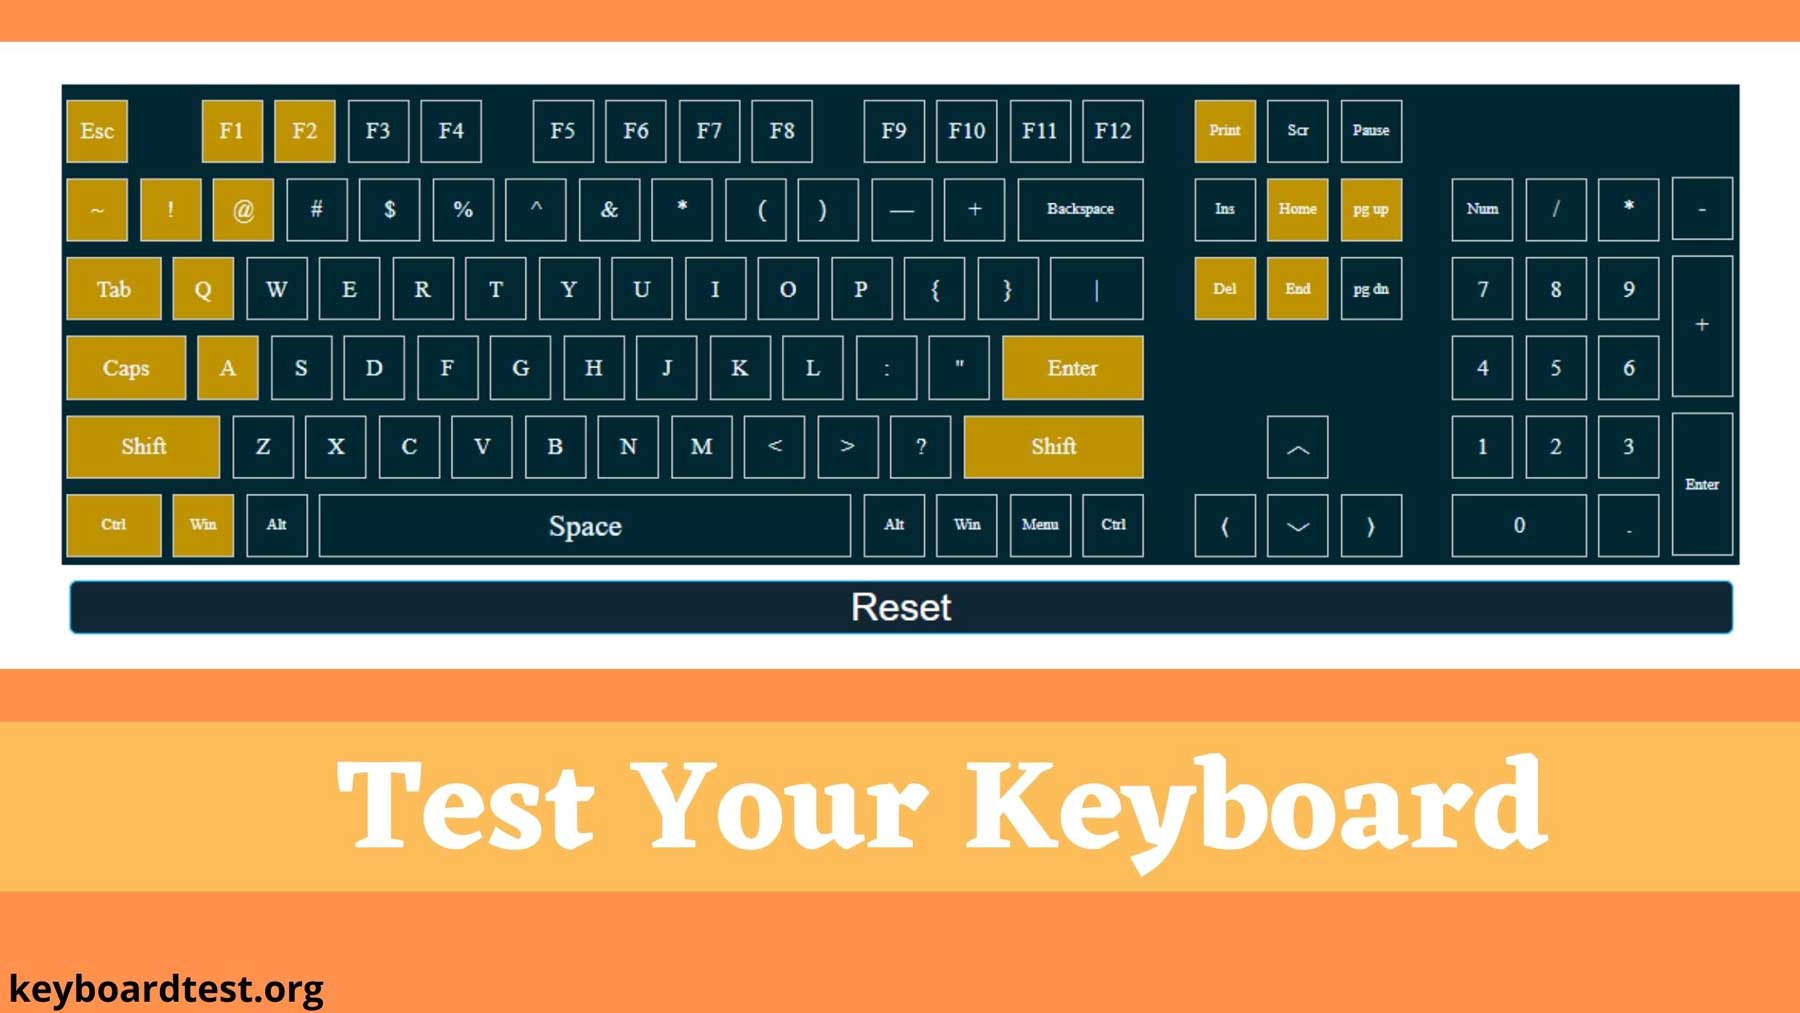 Download Keyboard Test Utility for PC-Windows 7/8/10 (Updated 2020)